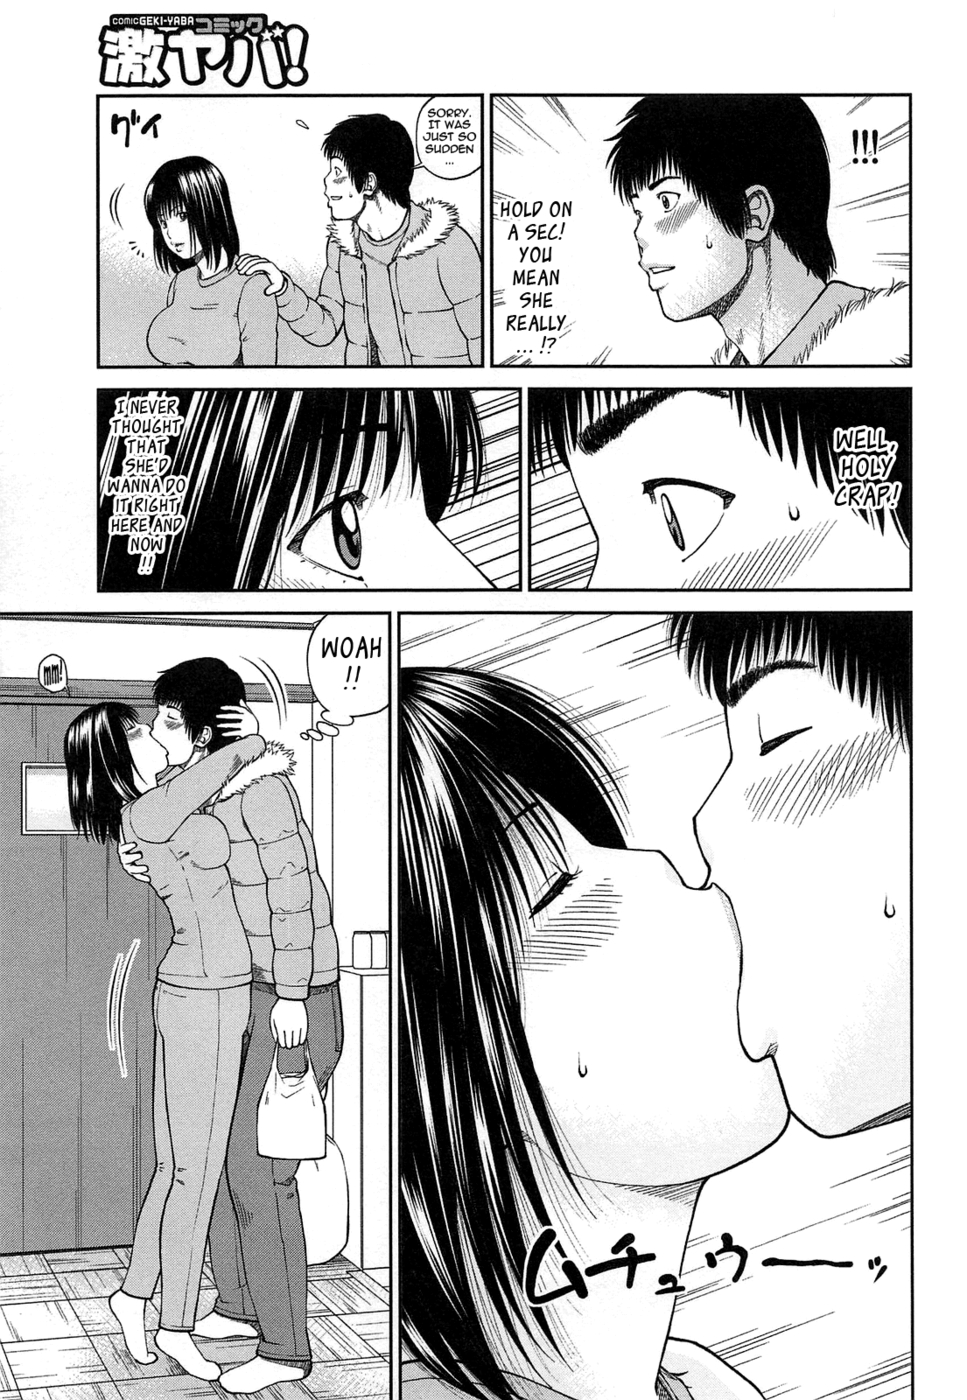 Hentai Manga Comic-35 Year Old Ripe Wife-Chapter 3-The Plan For A Fling With My Friend's Wife-7